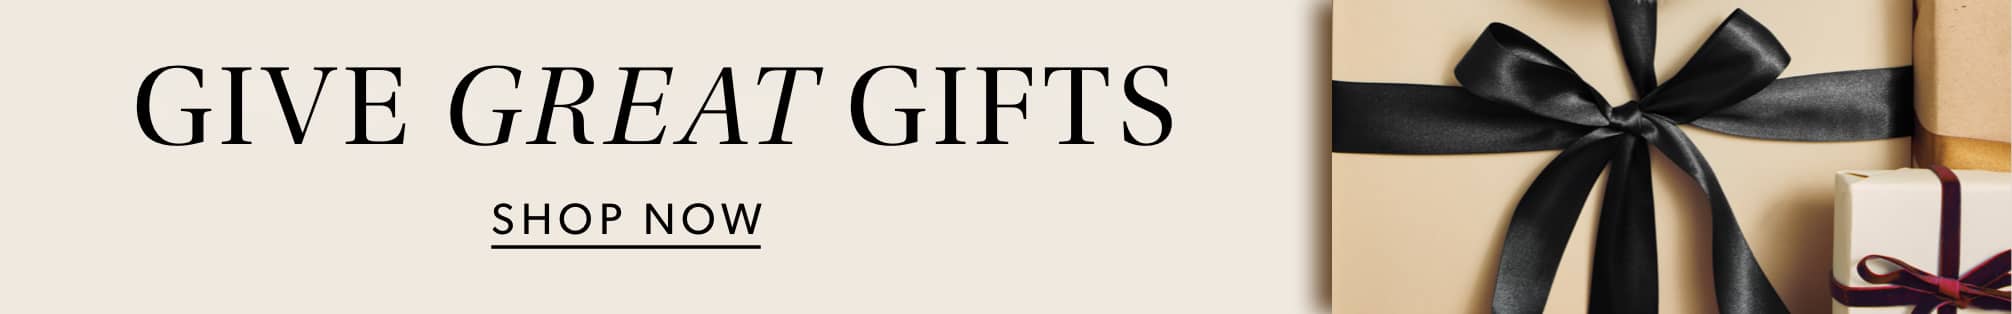 Give Great Gifts - Shop Now